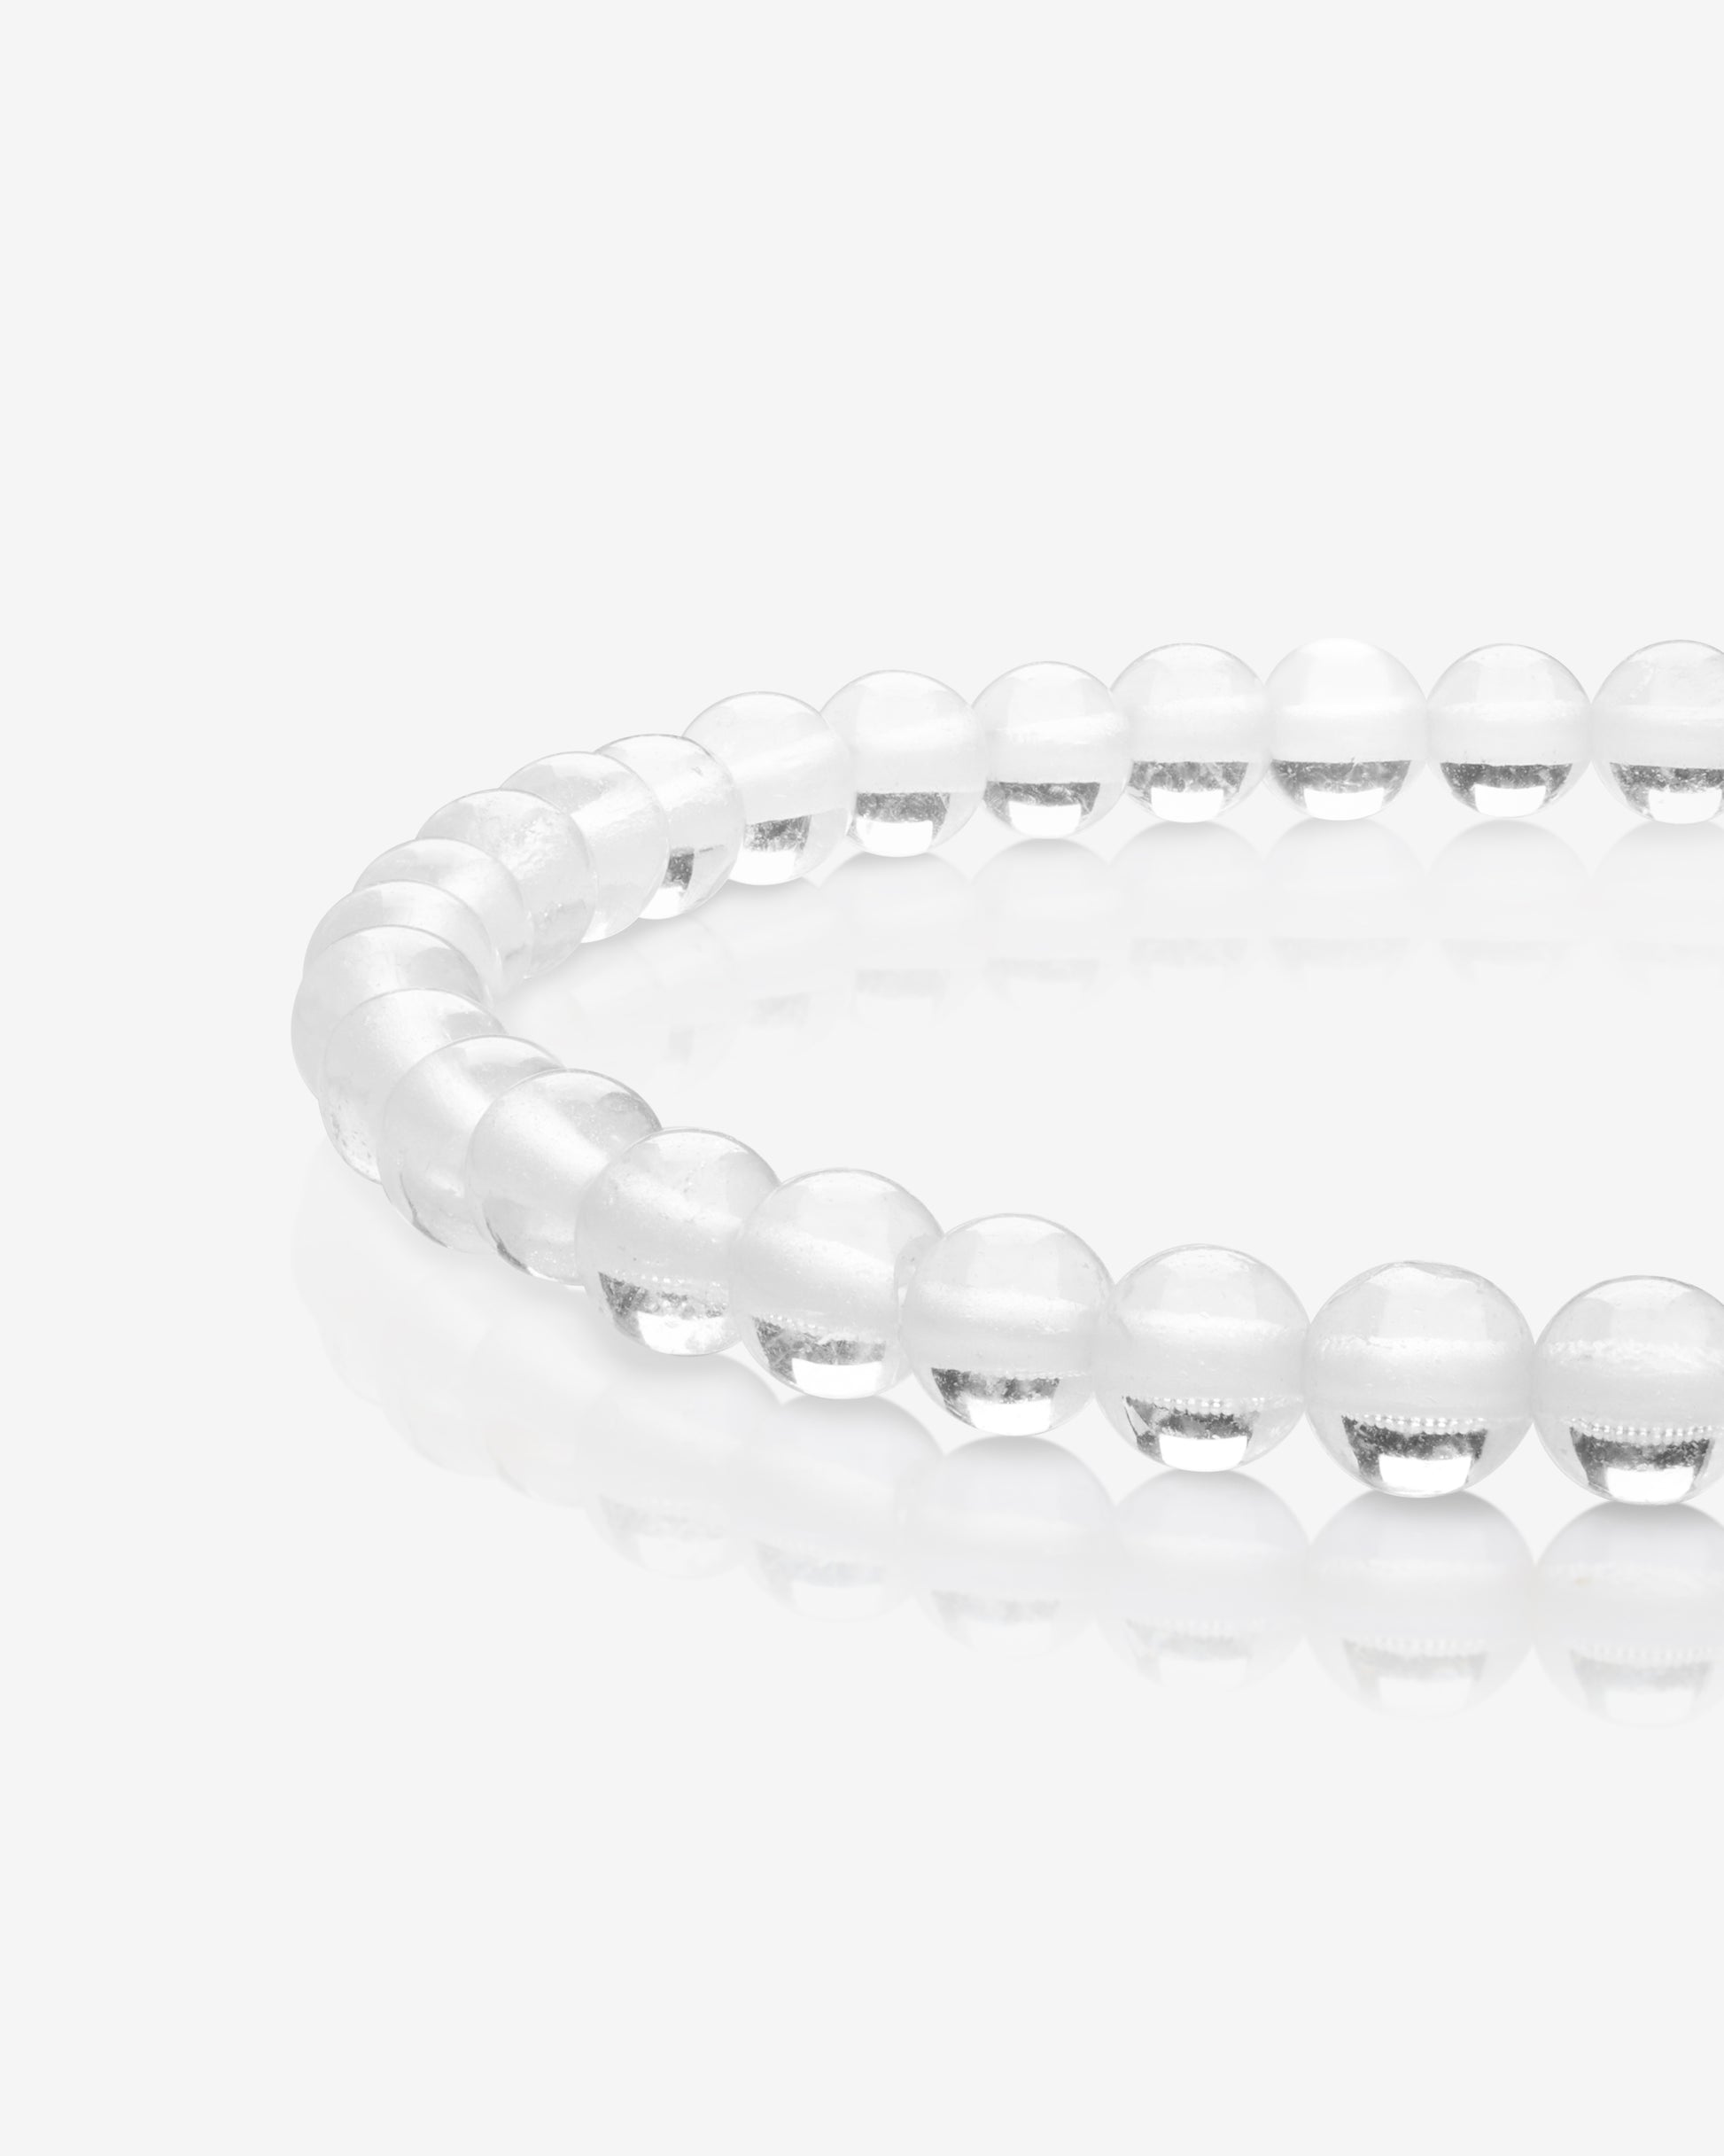 Hotshellow-Elegant clear quartz dainty bracelet with spherical beads and a reflective polished finish on a white background.